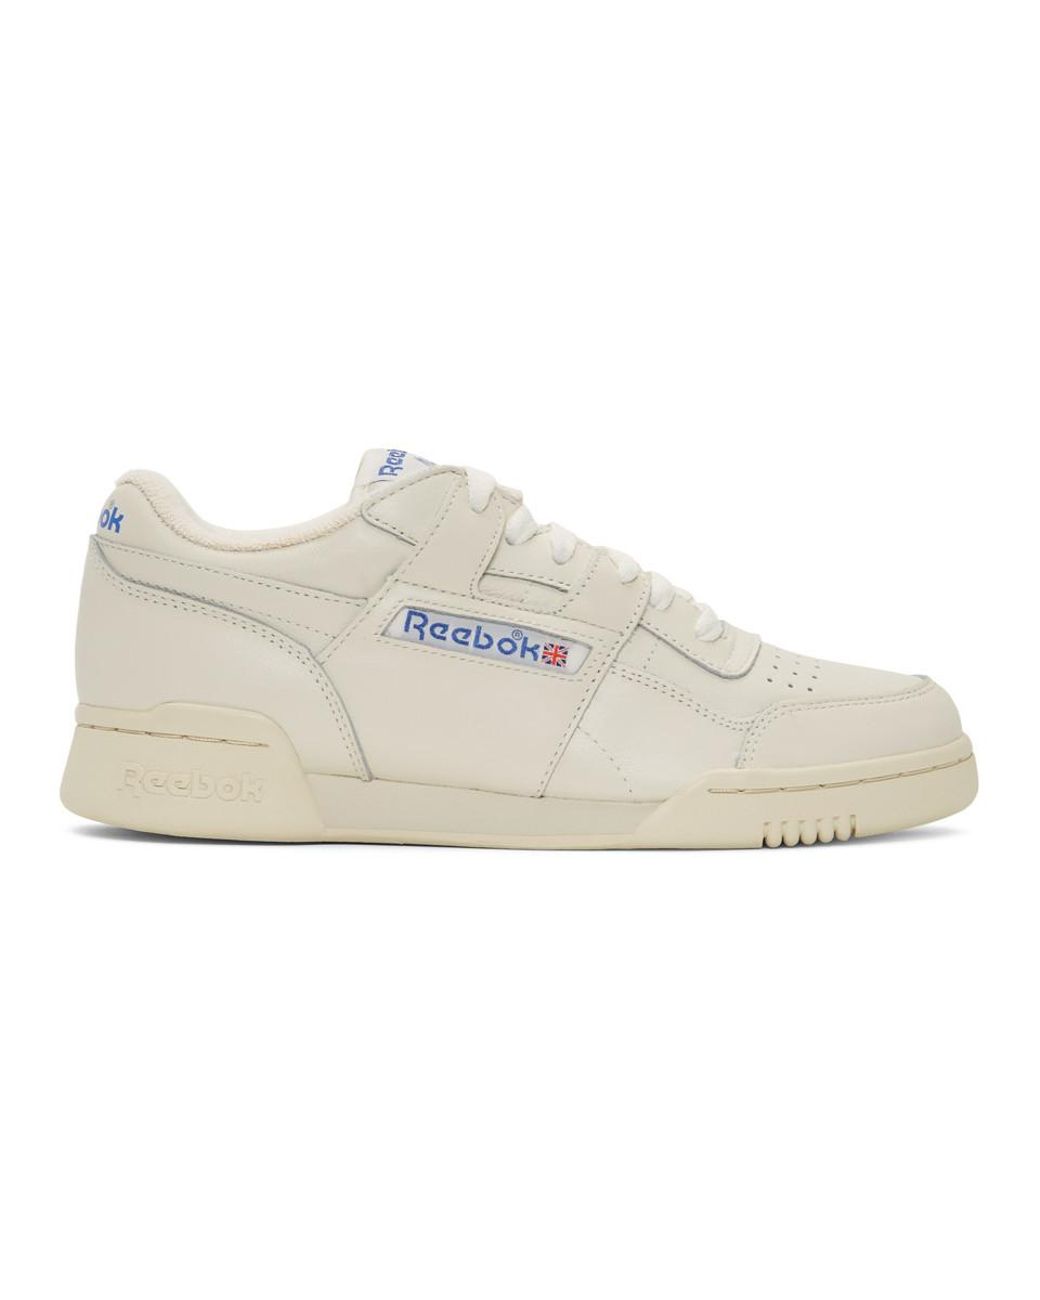 Reebok Leather White Workout Plus 1987 Tv Sneakers for Men - Save 2% - Lyst